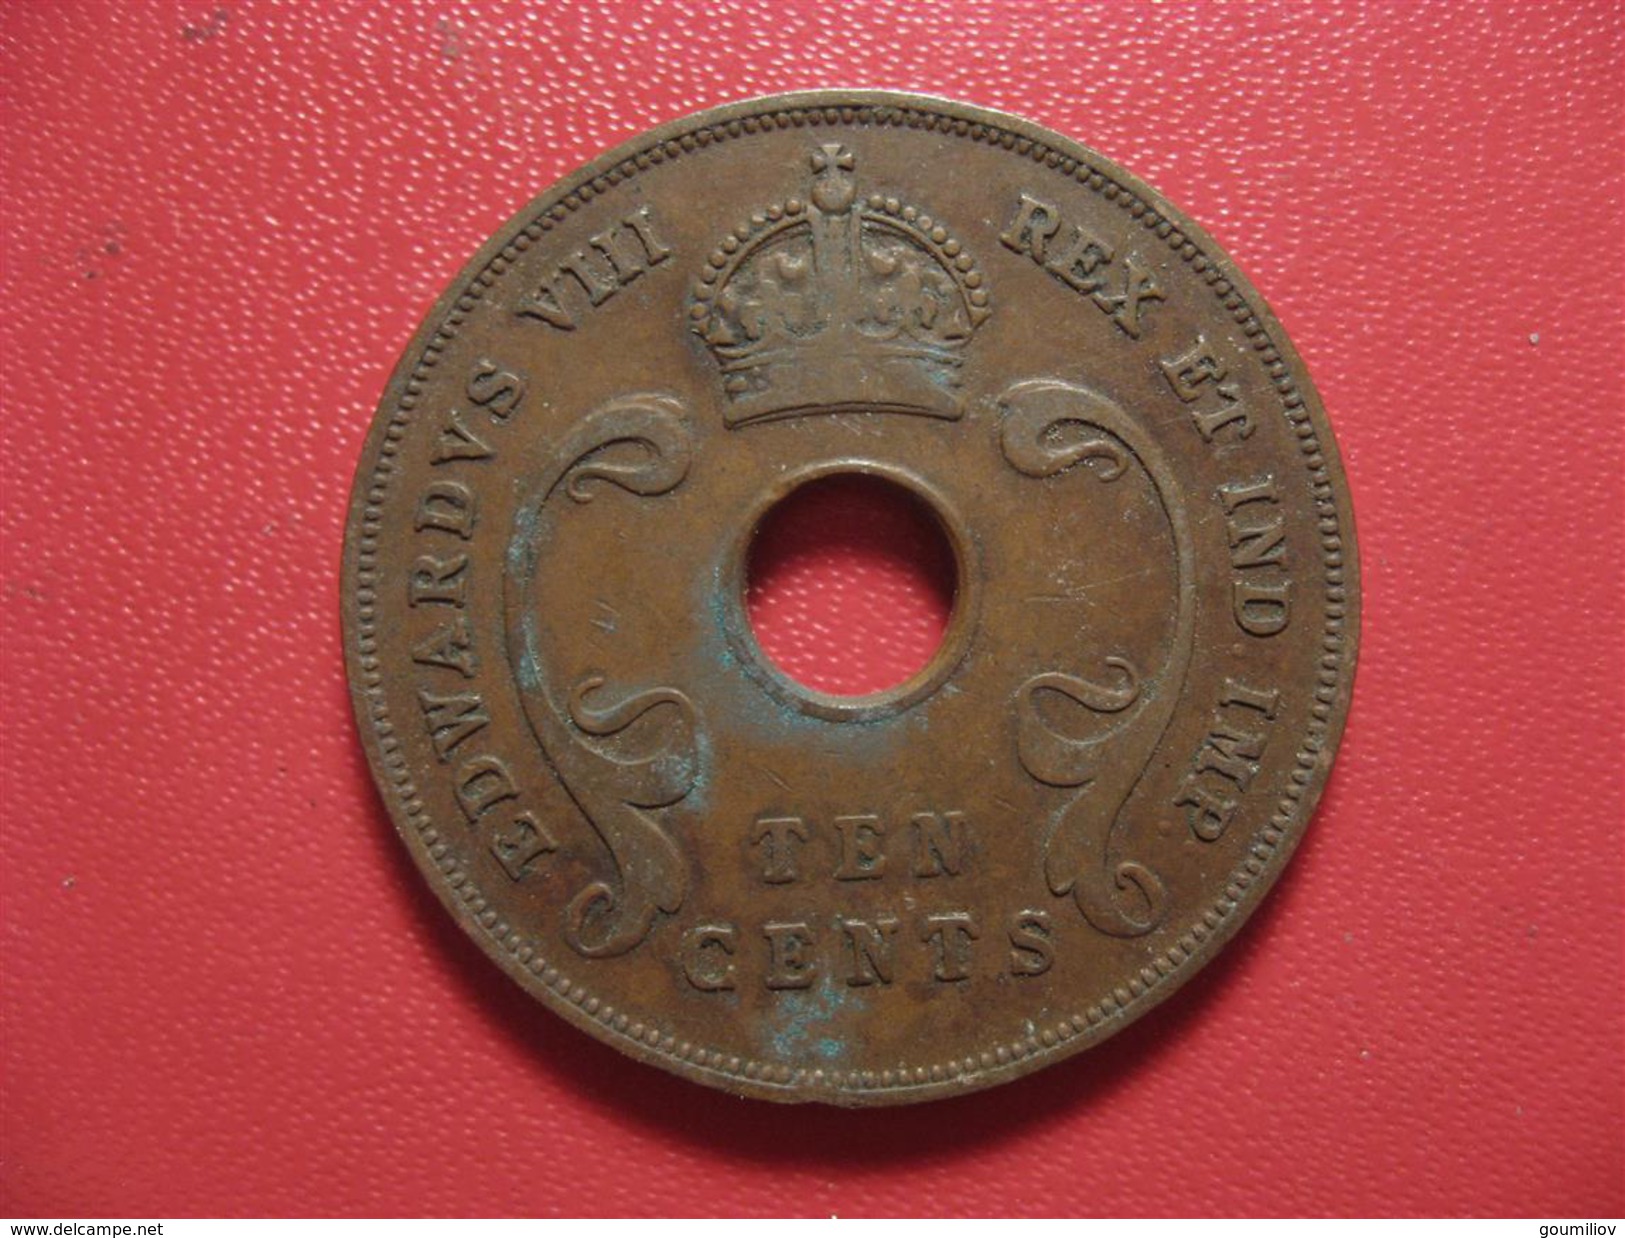 East Africa - 10 Cents 1936 6992 - British Colony